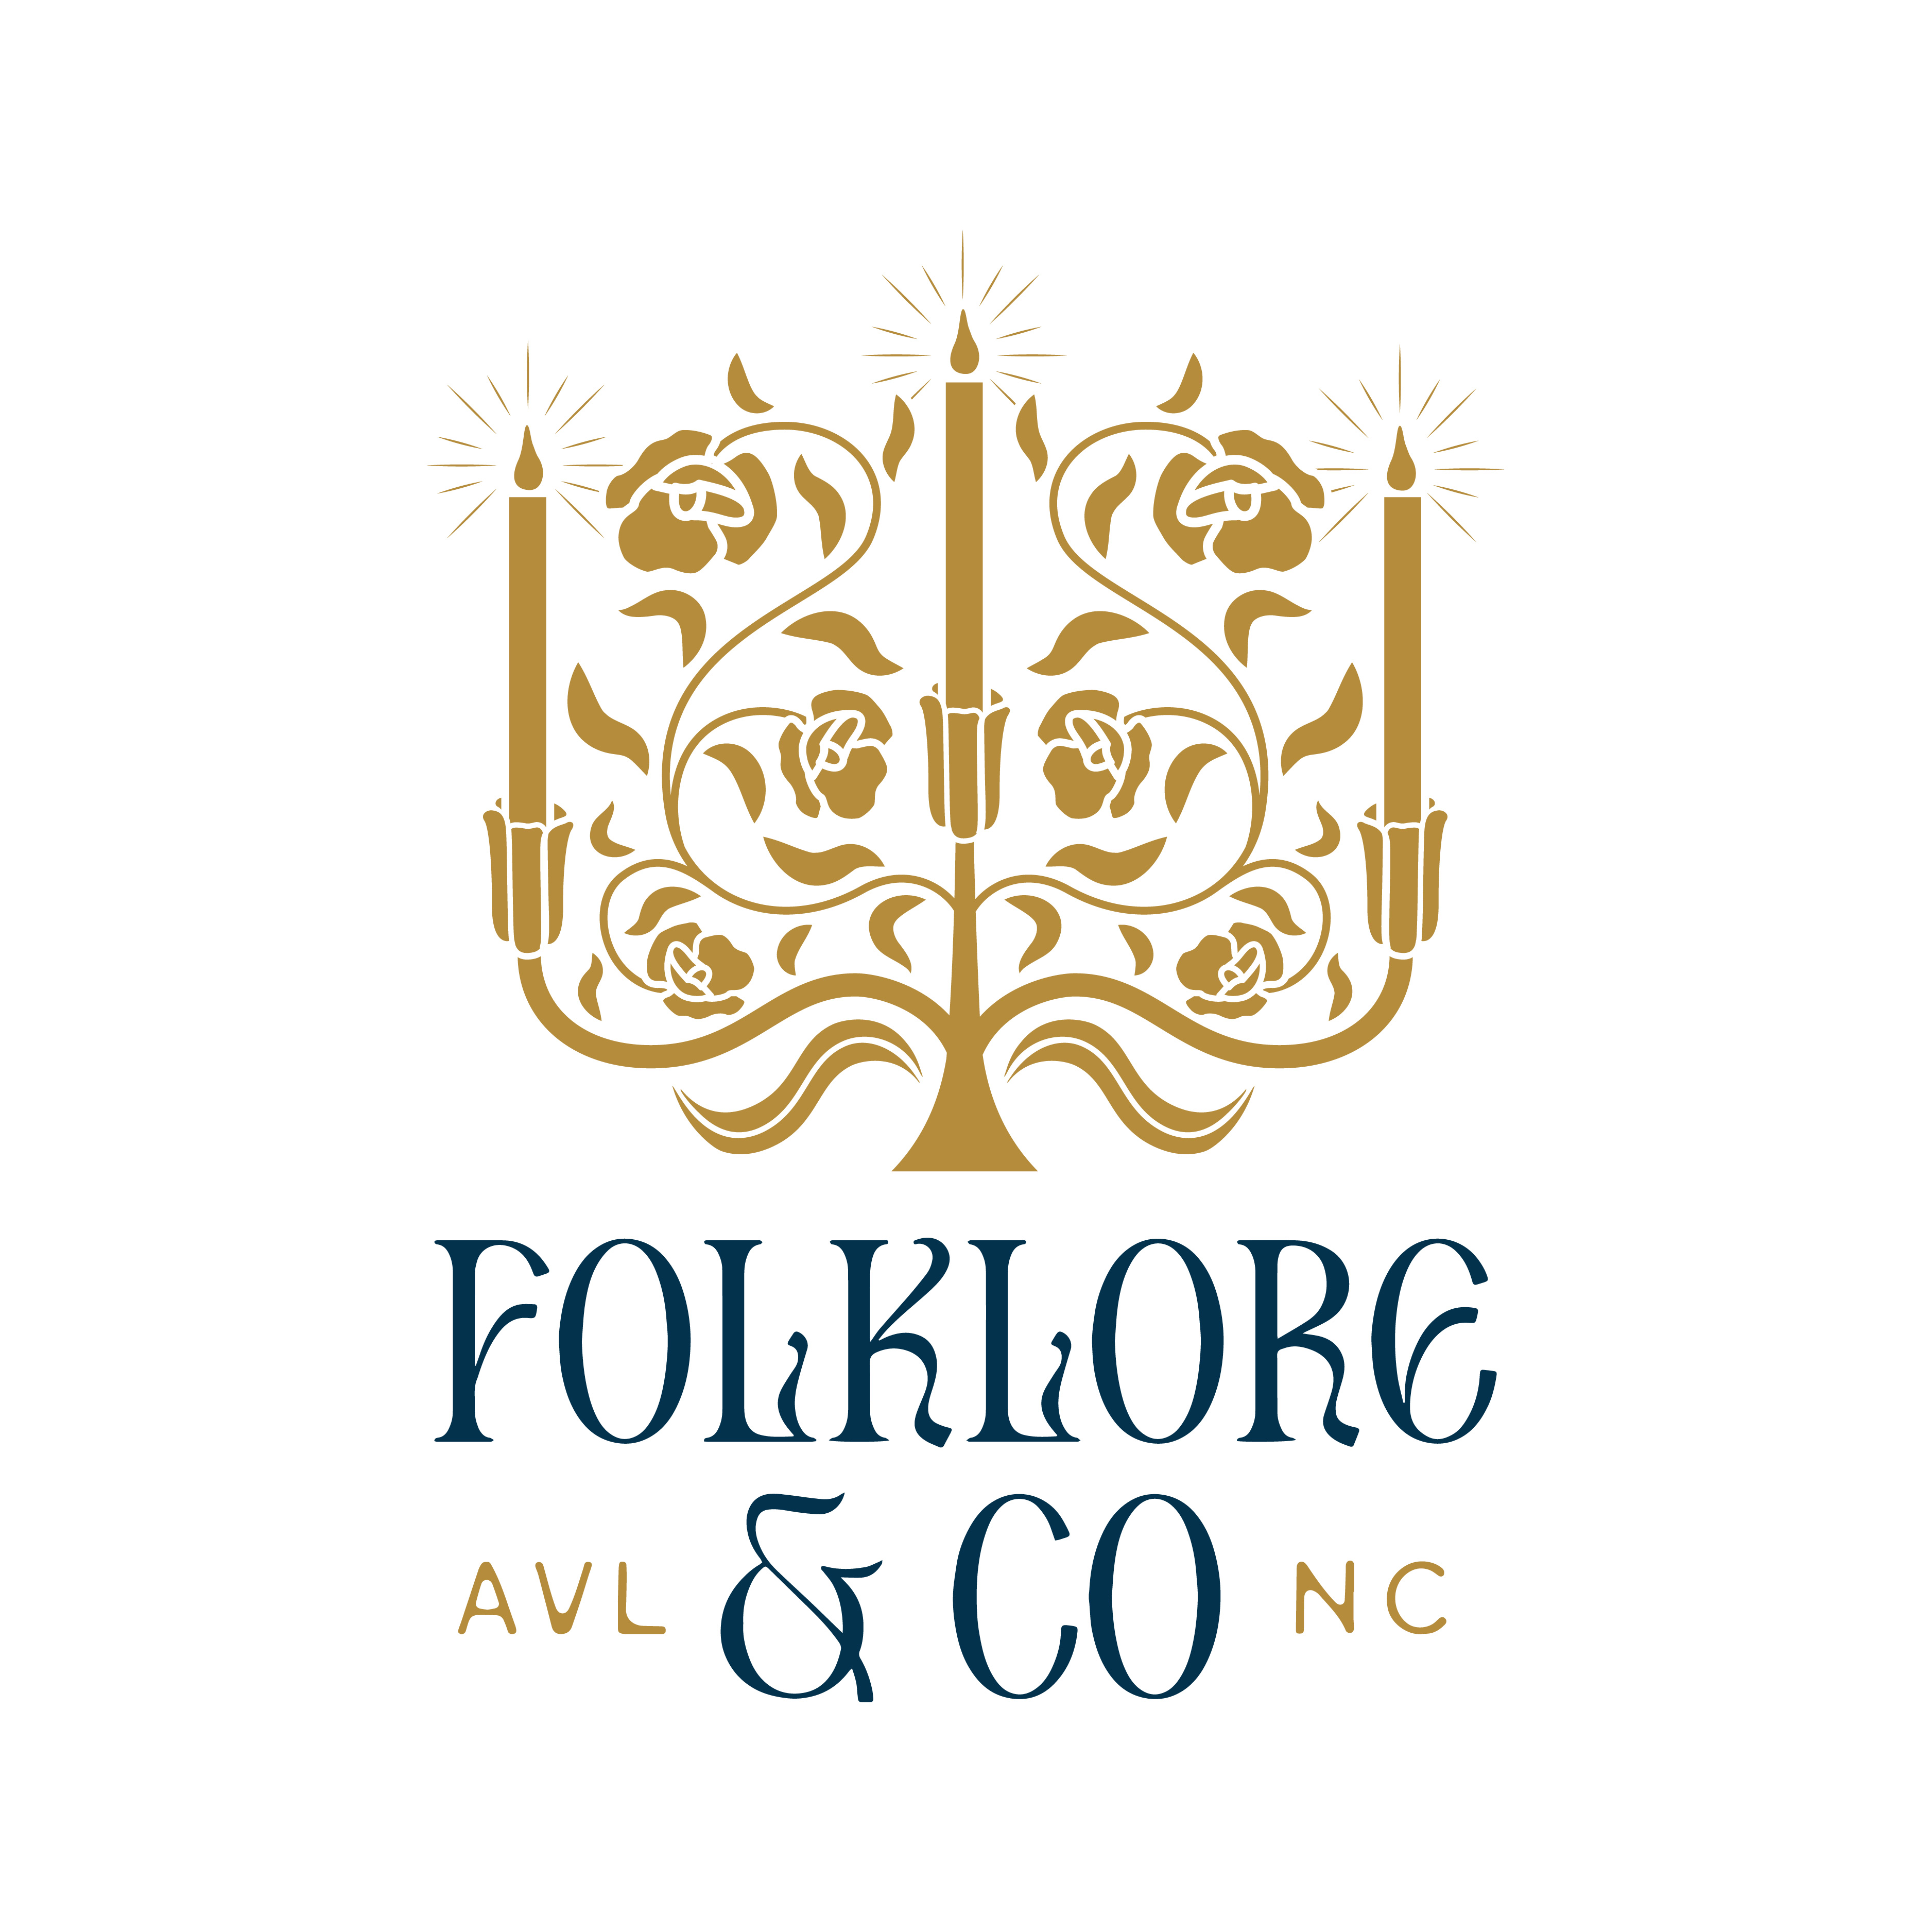 Folklore & Co Logo Concept logo design by logo designer Taylor Sutherland Design Co for your inspiration and for the worlds largest logo competition